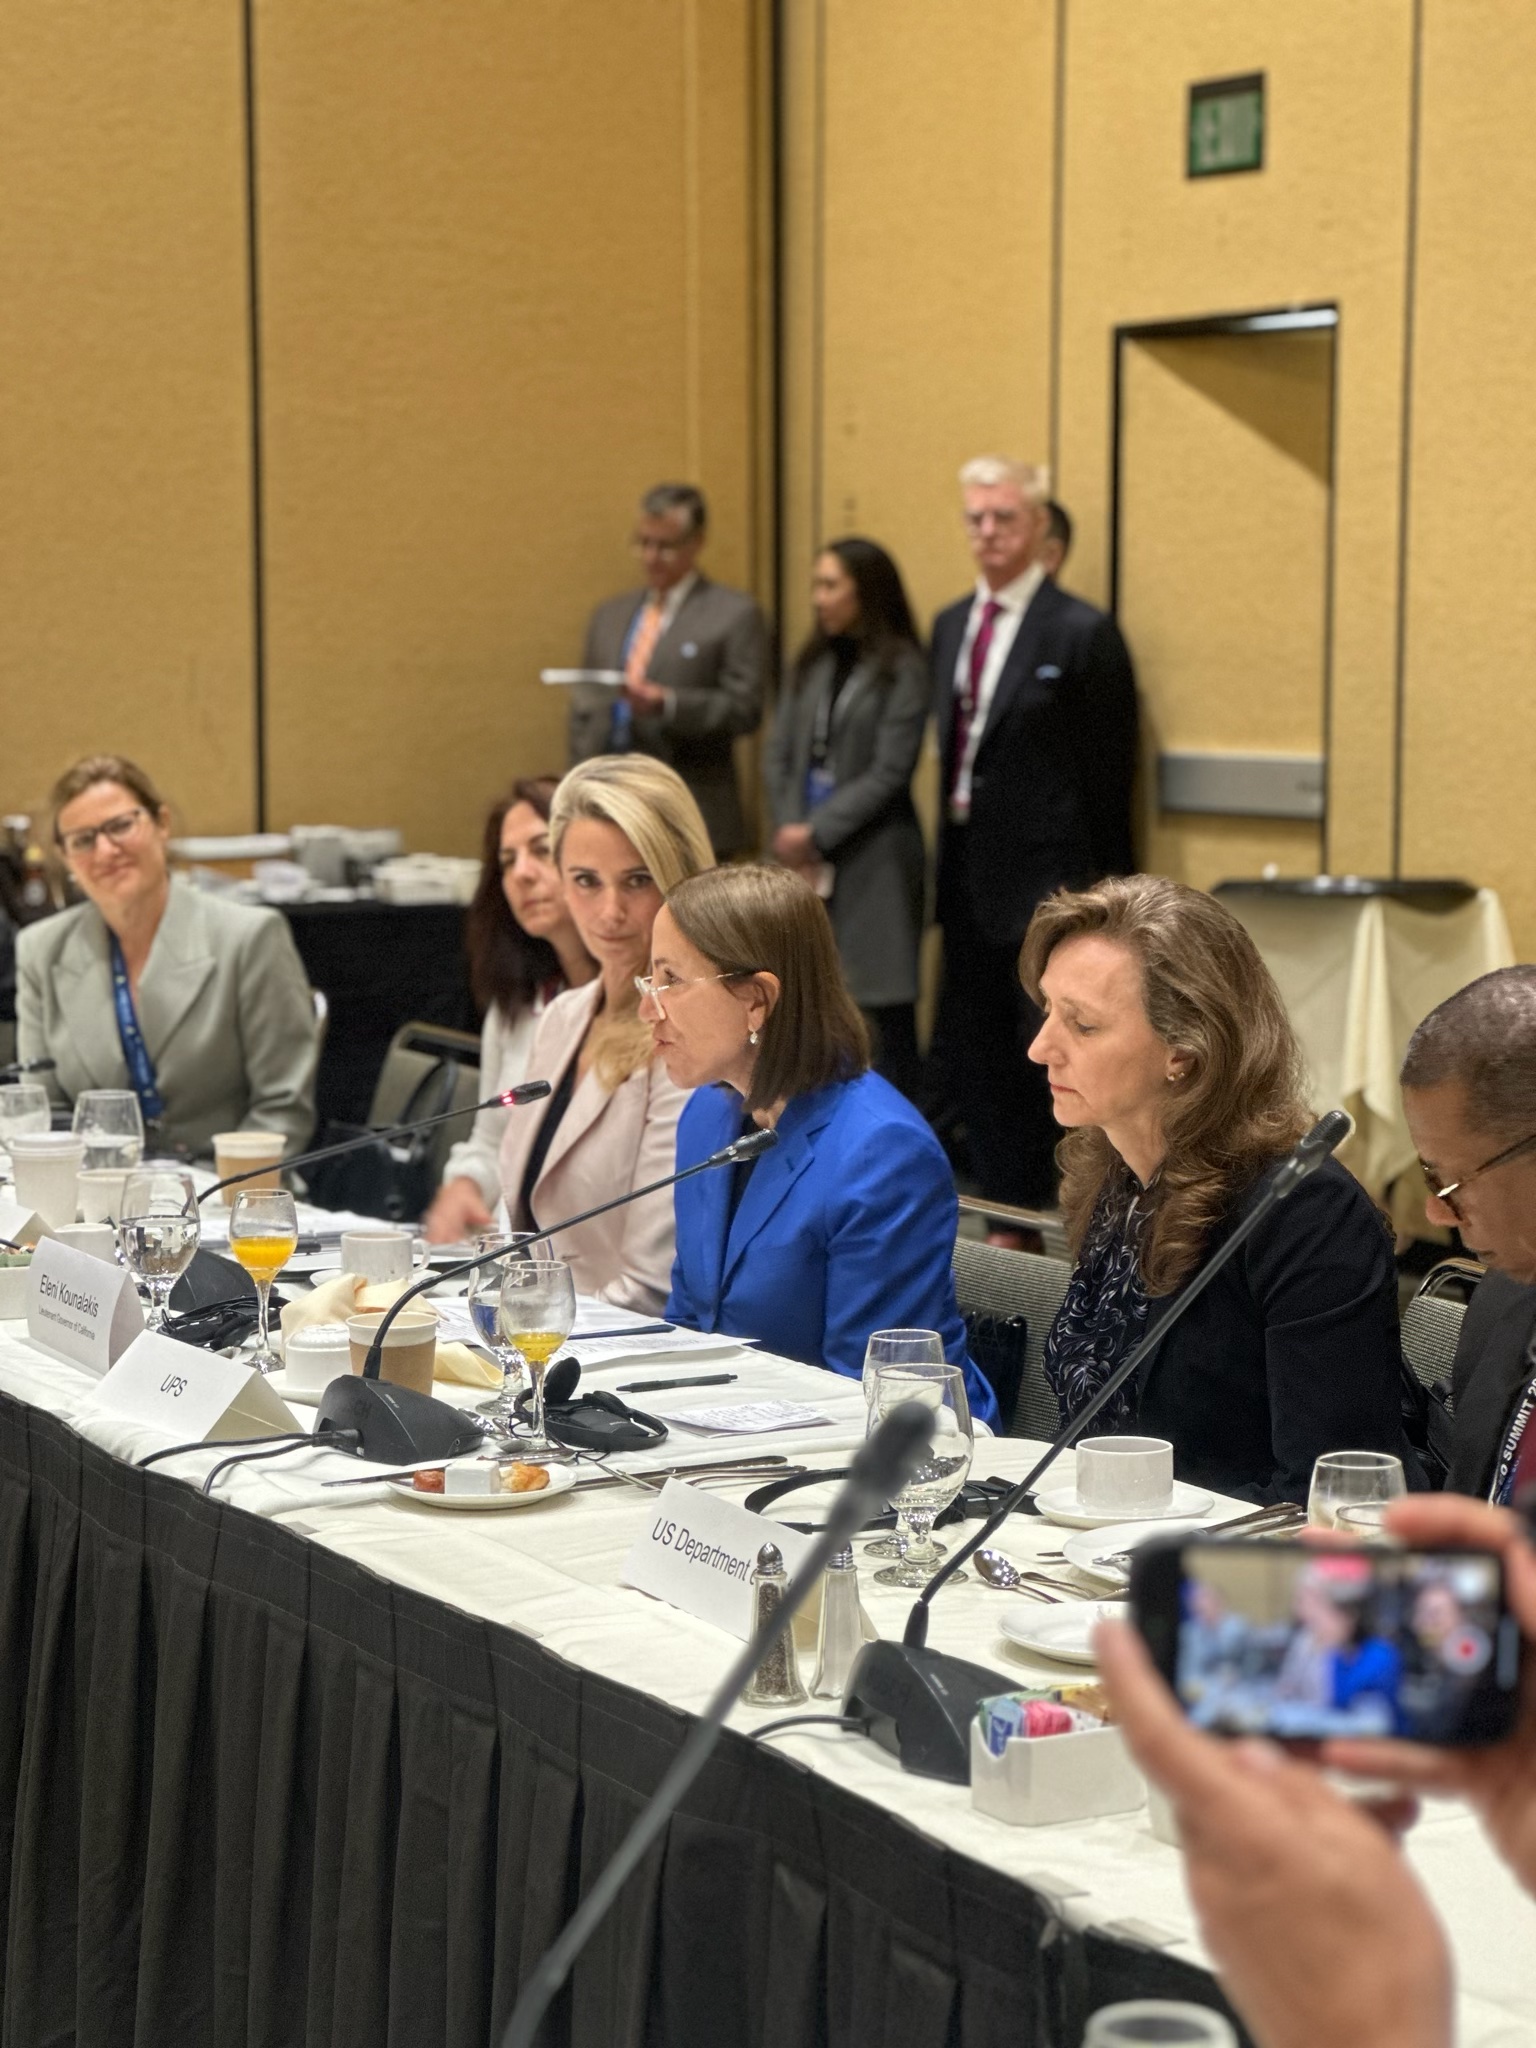 Image of Lt. Gov. Kounalakis speaking at a table with First Partner Siebel Newsom and other dignitaries at the APEC Summit. 